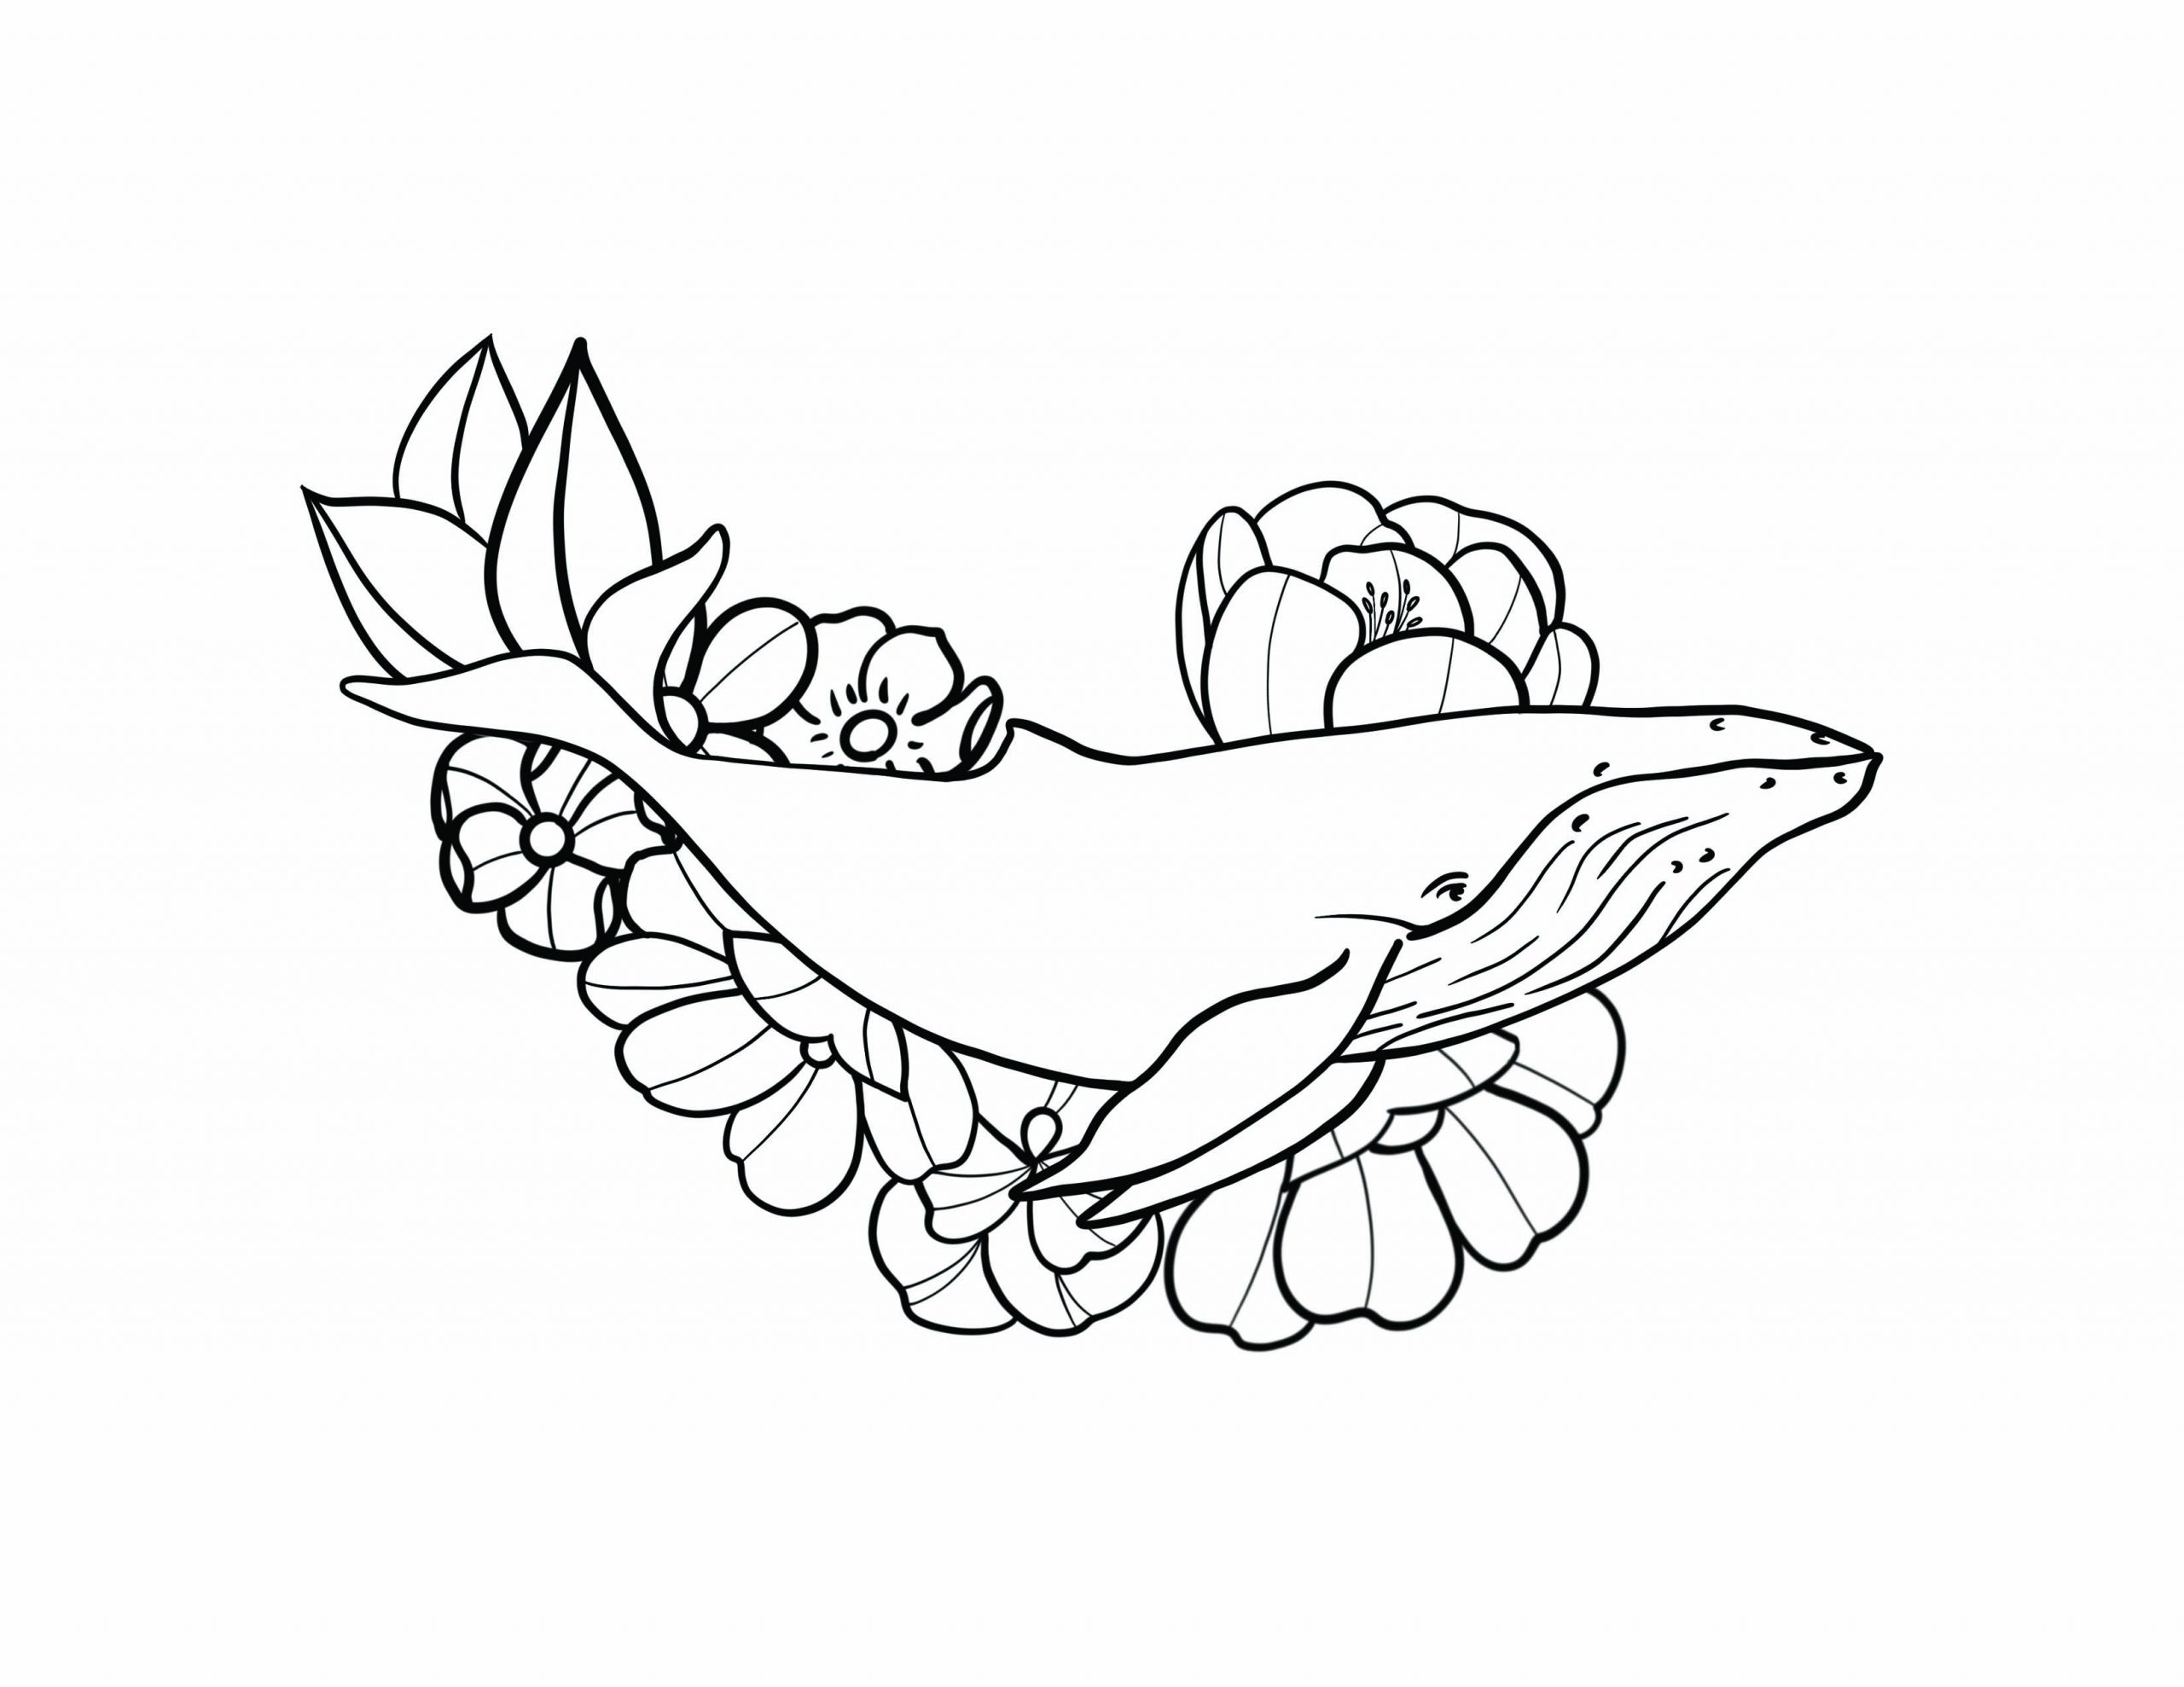 FREE Coloring Page: Humpback Whale Bouquet - Inktion